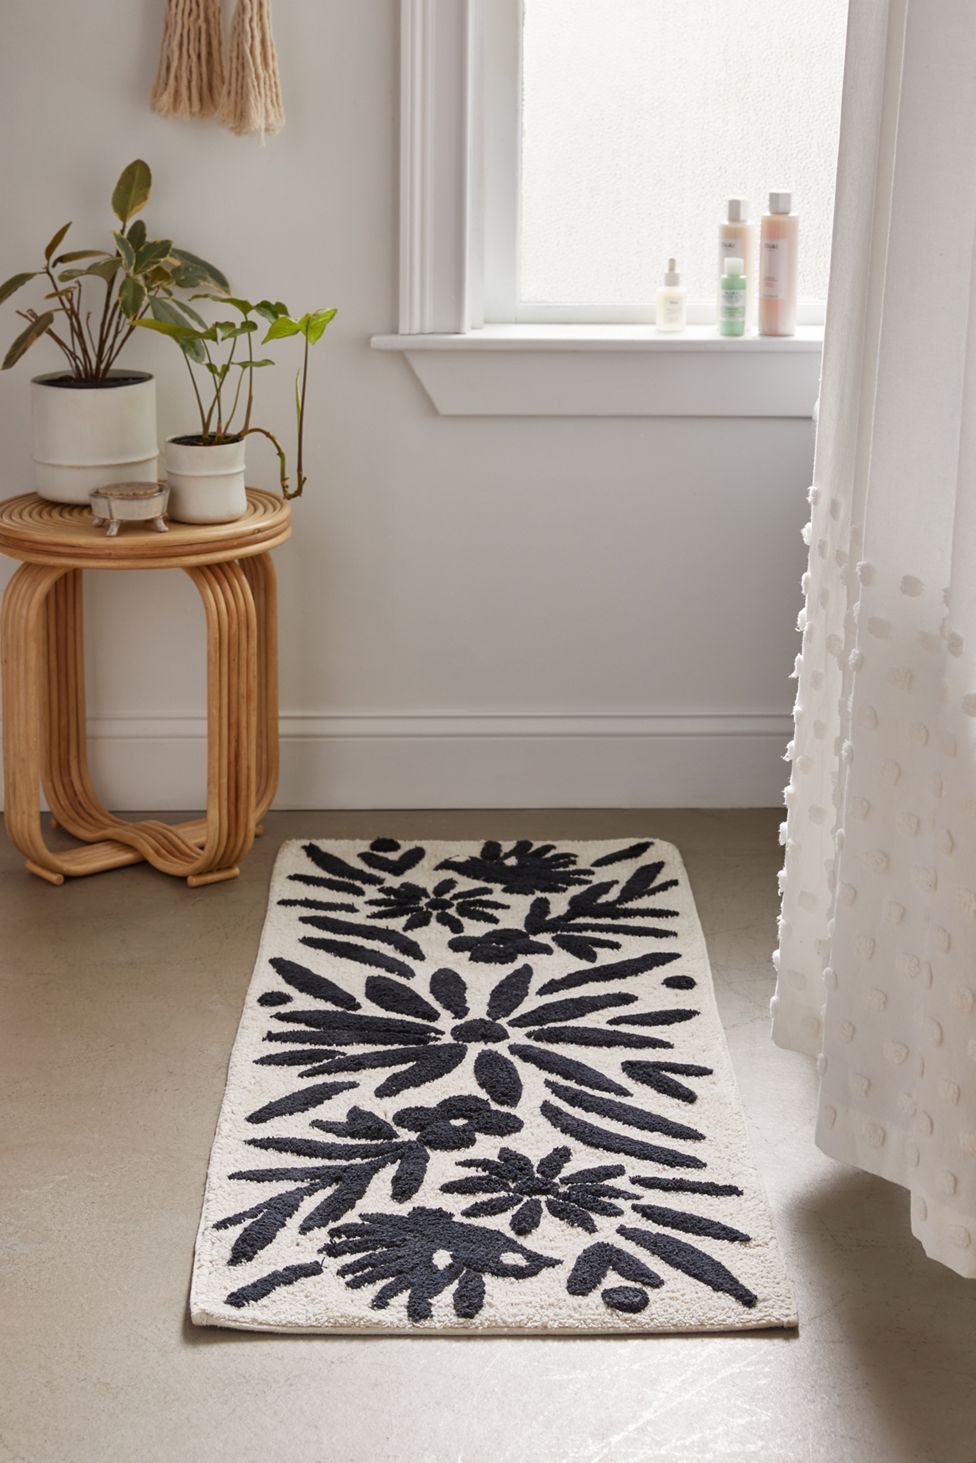 Bathroom rug sets – a few tips you must
know